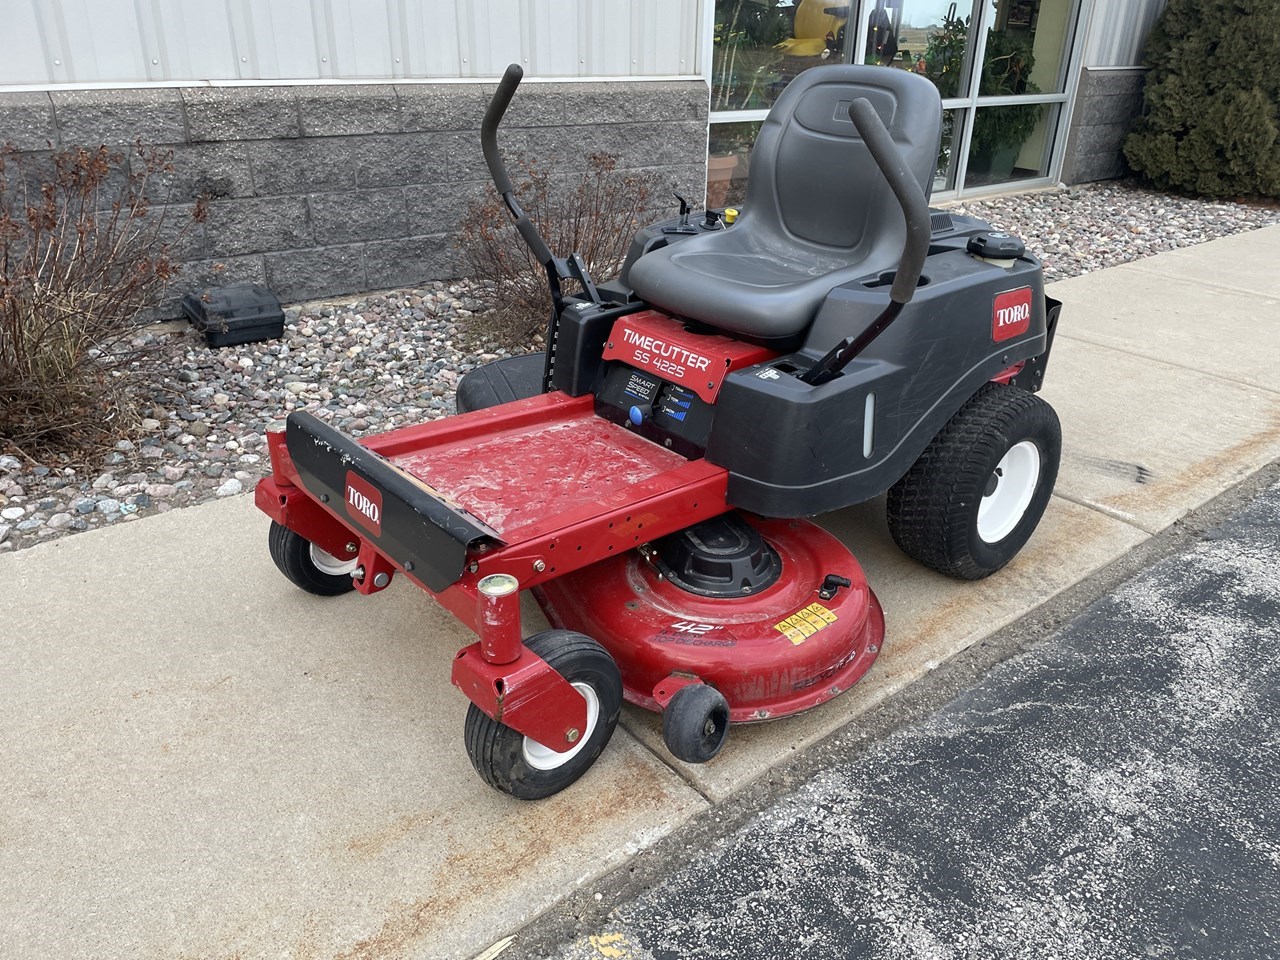 Toro Time Cutter SS4225 Image 1